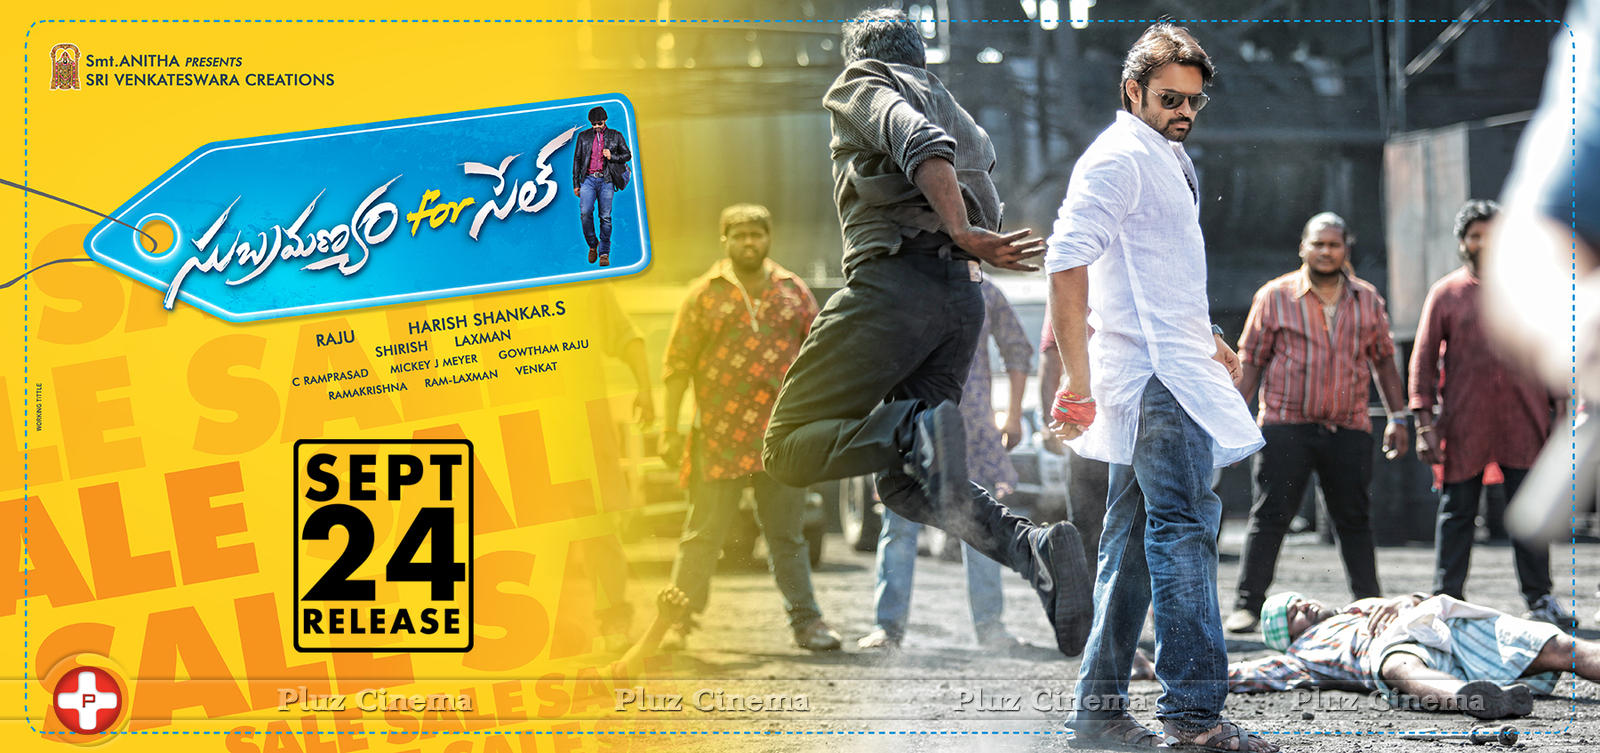 Subrahmanyam For Sale Movie Release Posters | Picture 1112020